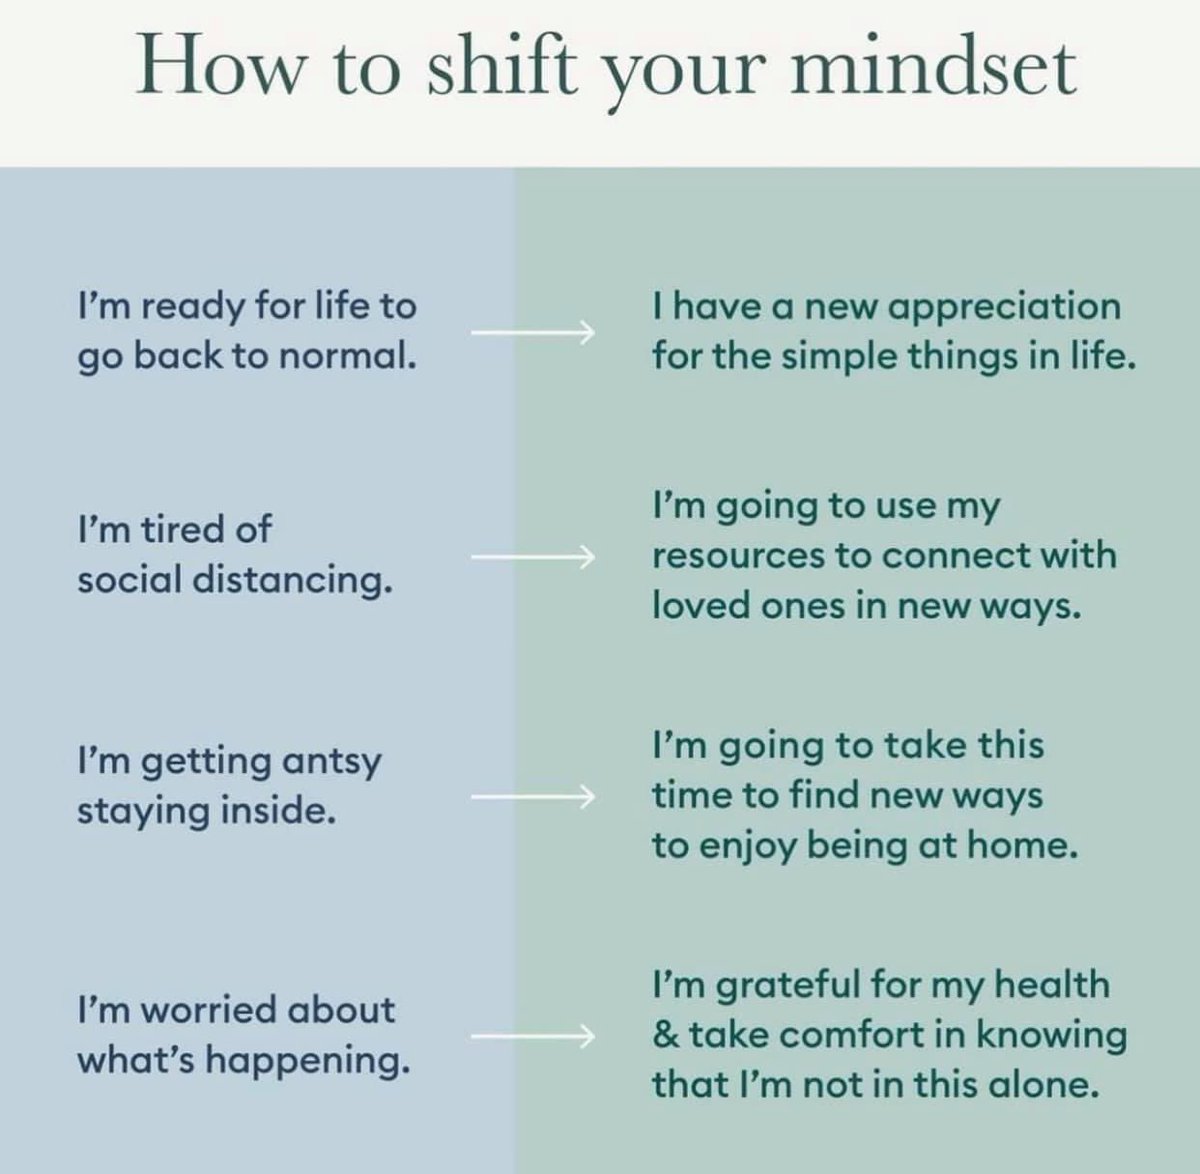 Times like these require a healthy mindset #MentalHealthIsReal 🙇🏽‍♀️🙏🏾